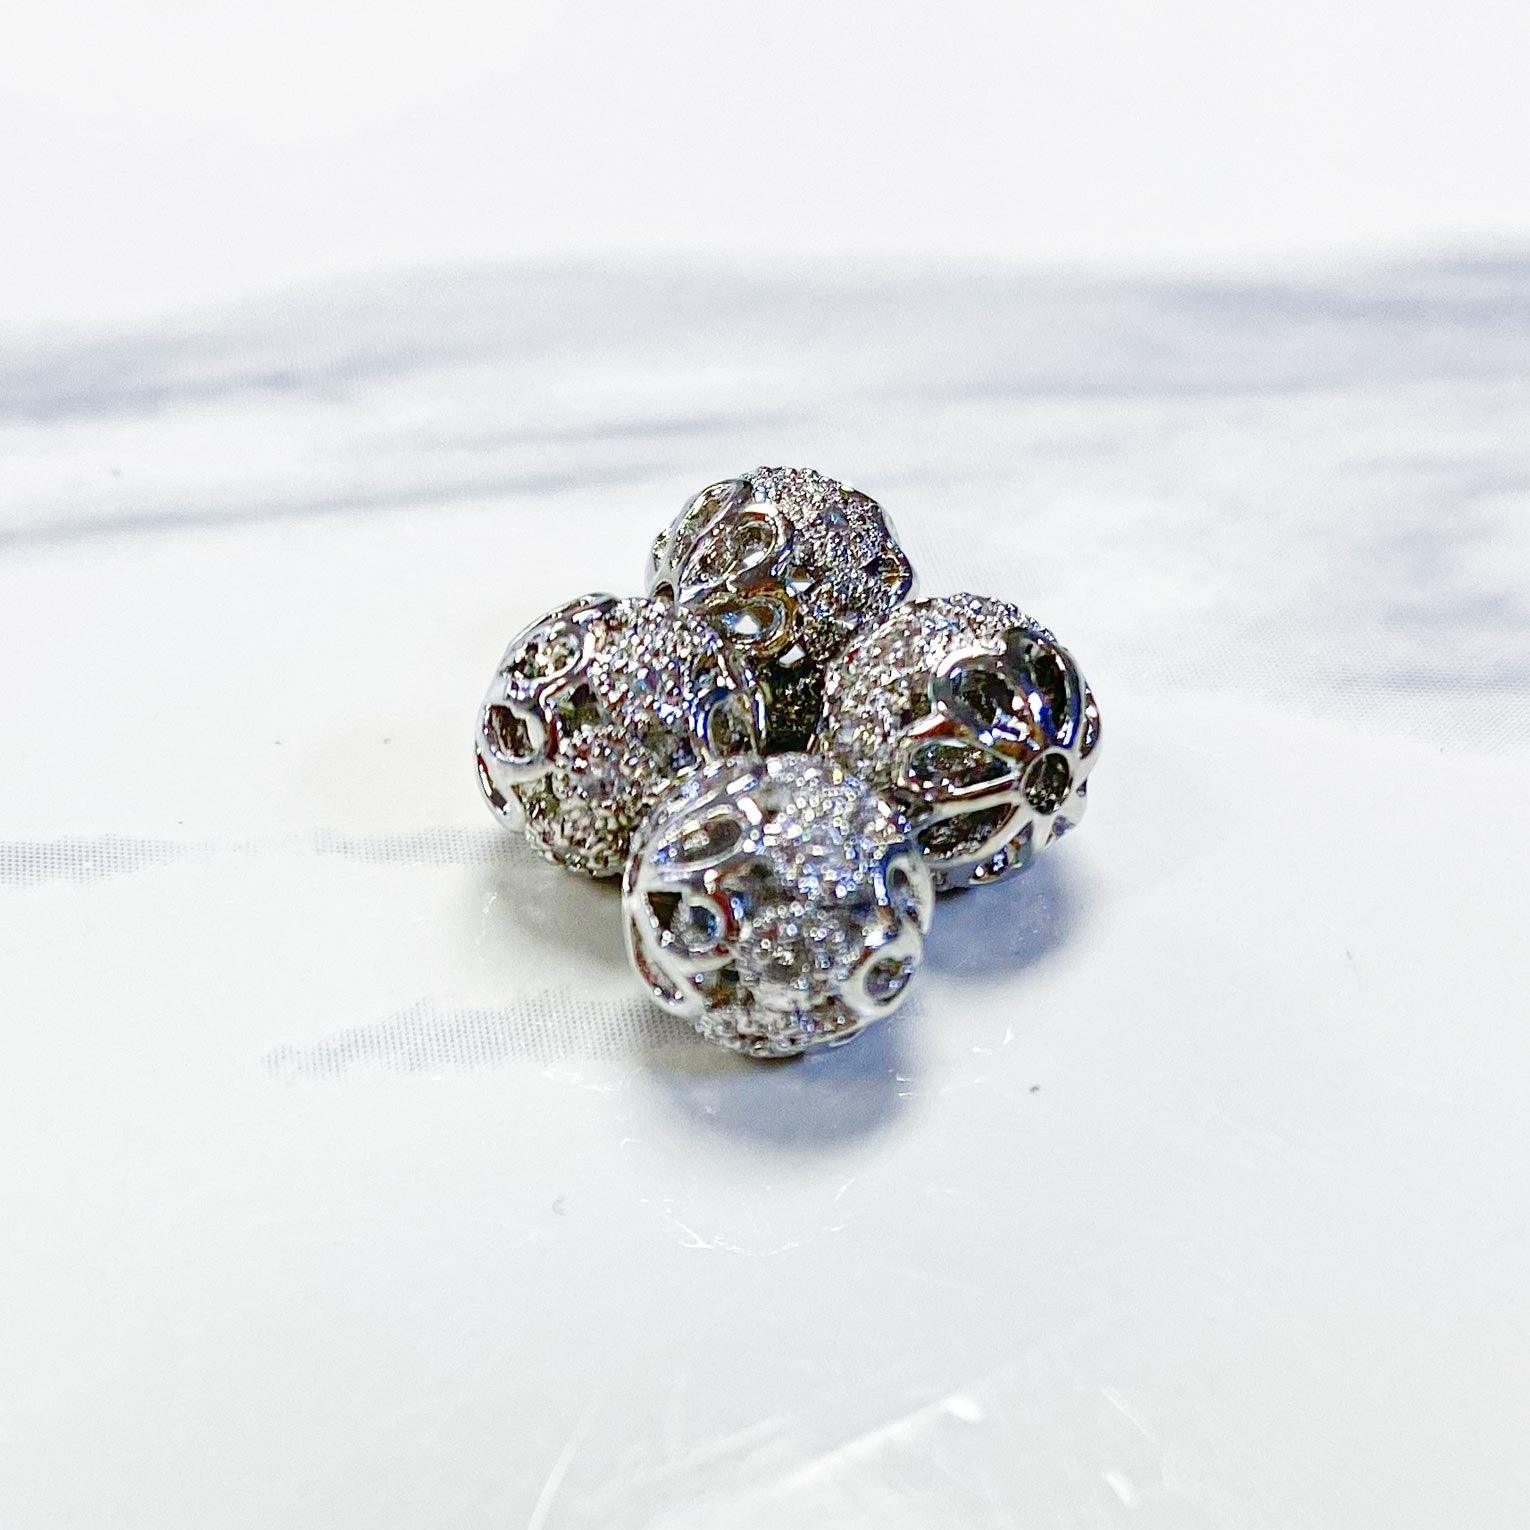 8mm Micro Pave CZ Beads (Sold by the Piece)